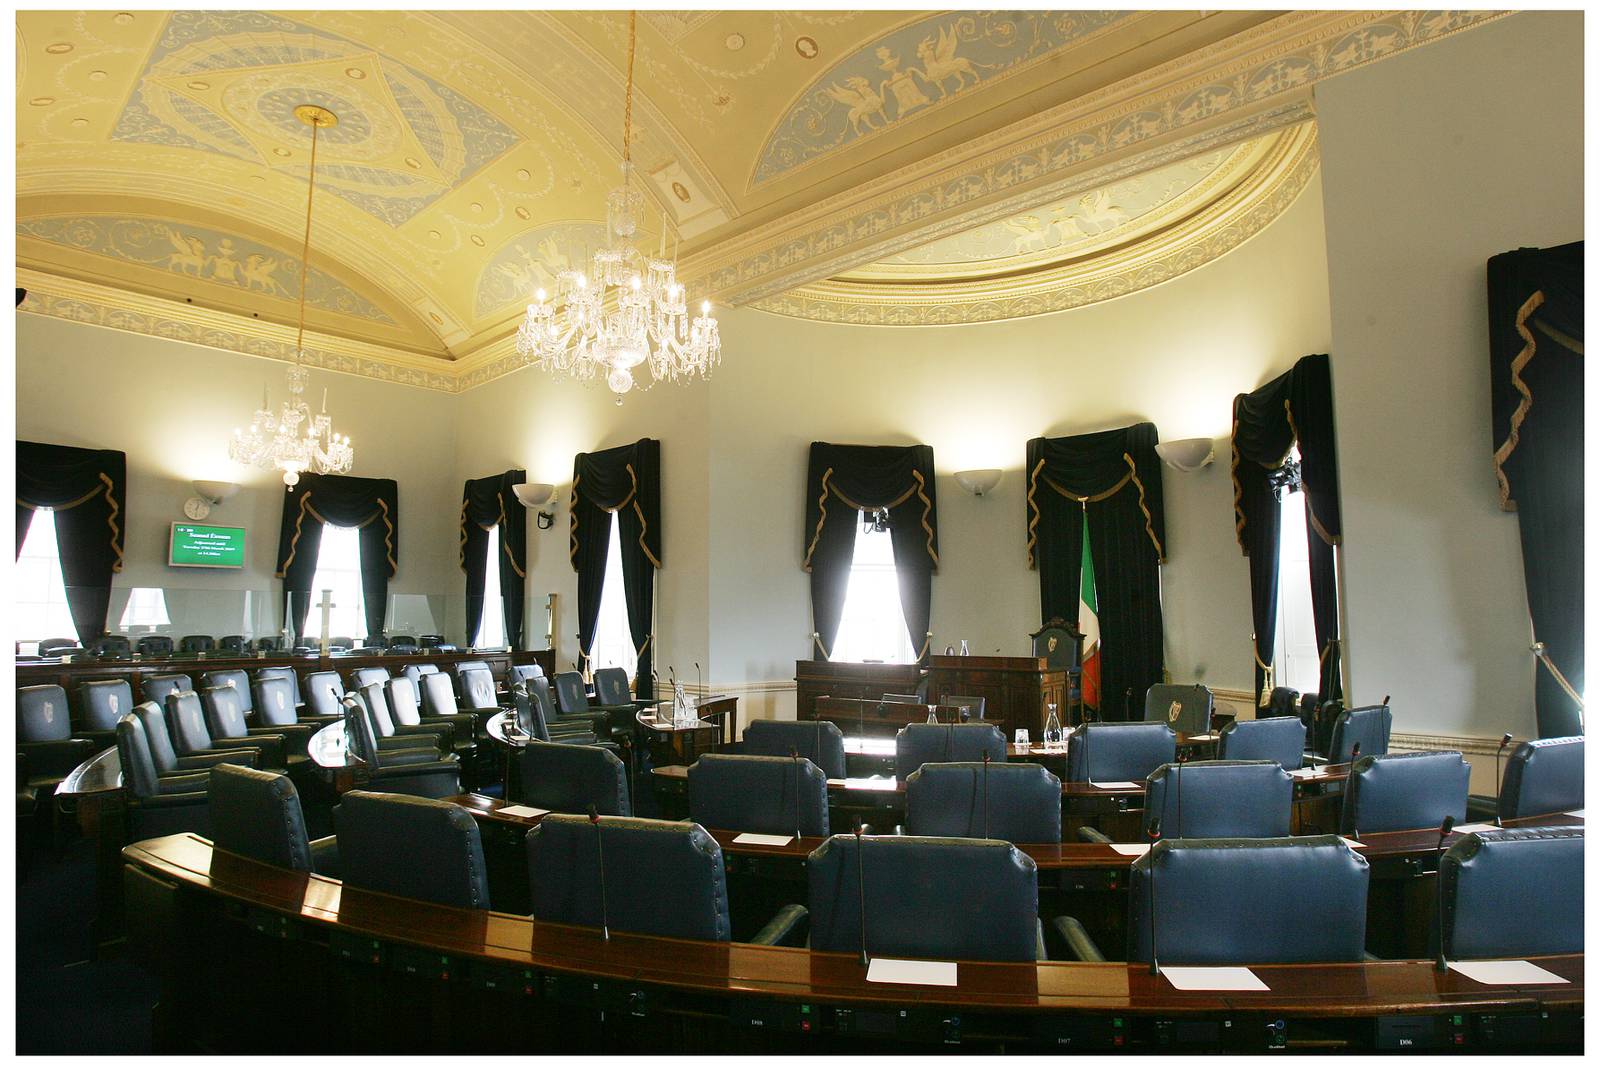 Photograph: Alan Betson, Irish Times Staff Photographer.
--------------------------------------

Houses of the Oireachtas Commission suppliment
The Seanad Chamber looking towards the chair of the Cathairleach at Leinster House ( senate ) 
taken on 26/3/07